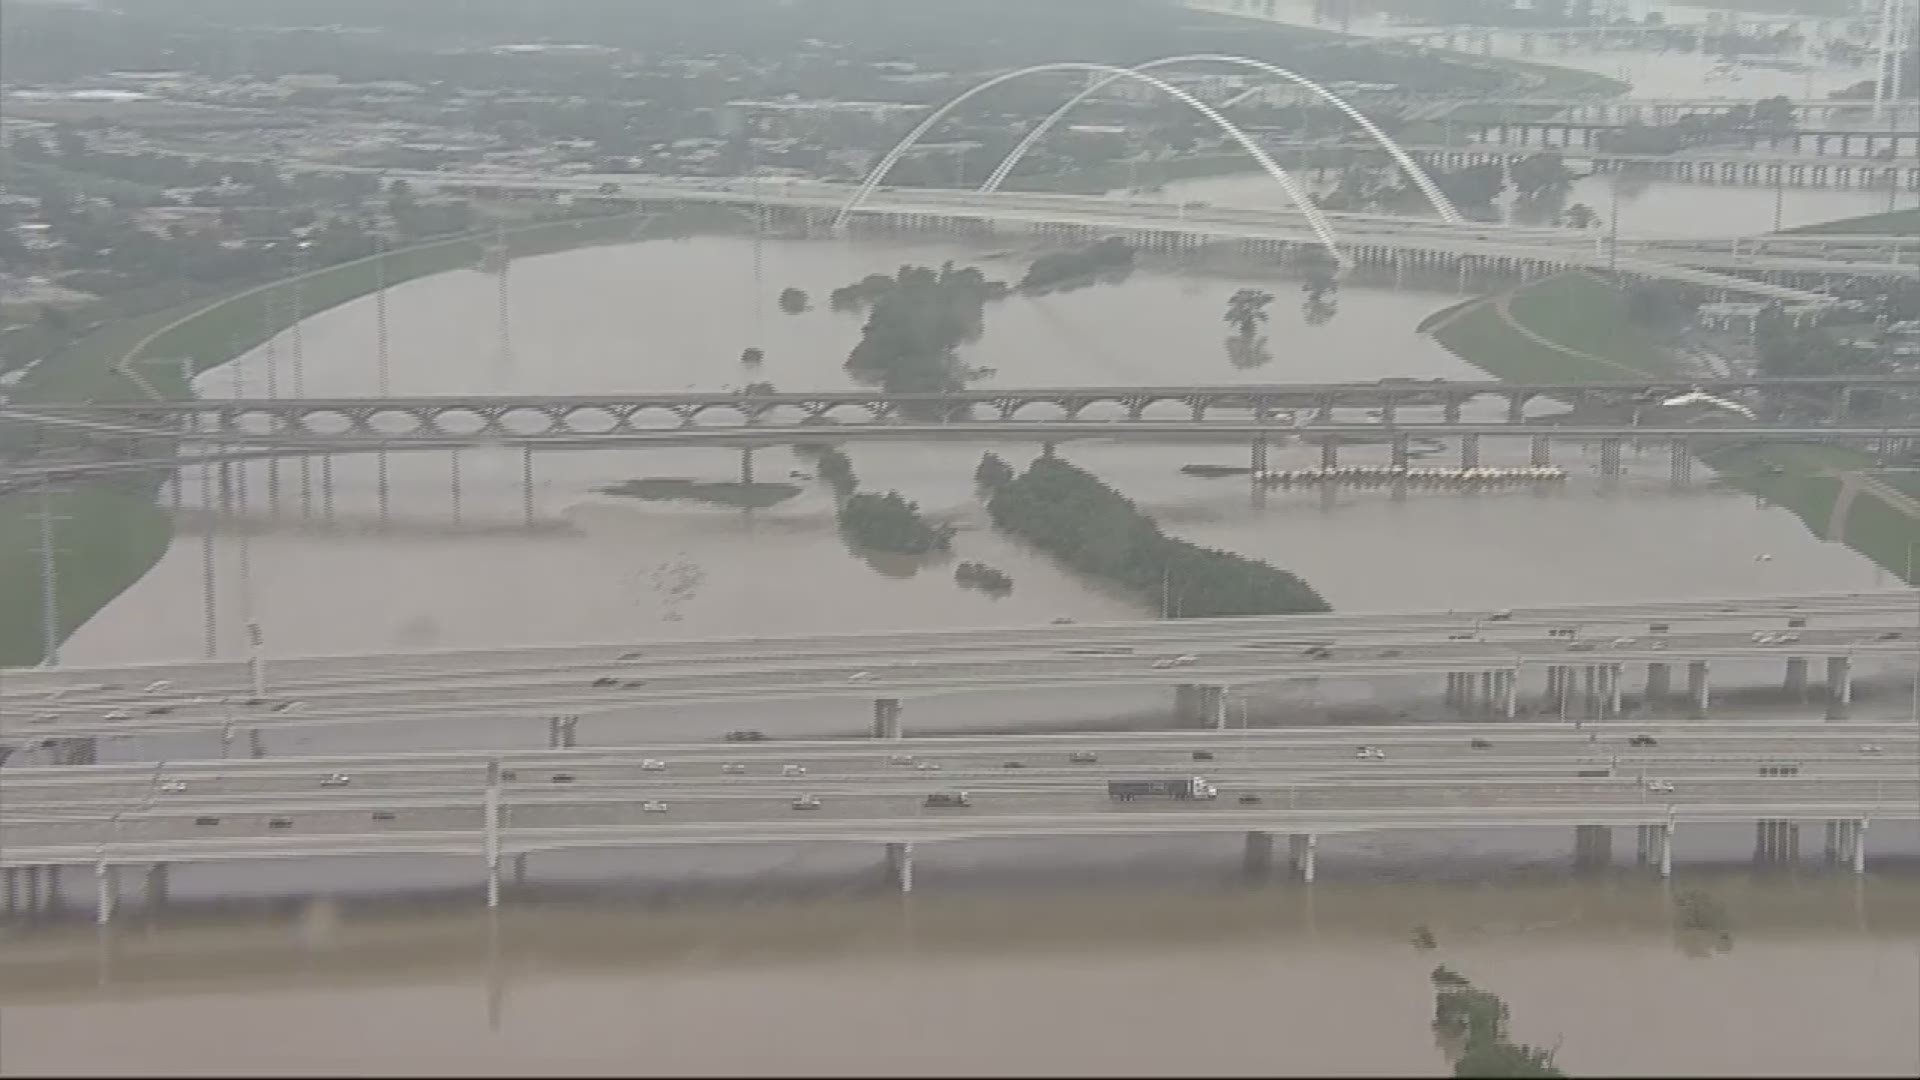 RAW: A look at Trinity River in Dallas during Flood Warning